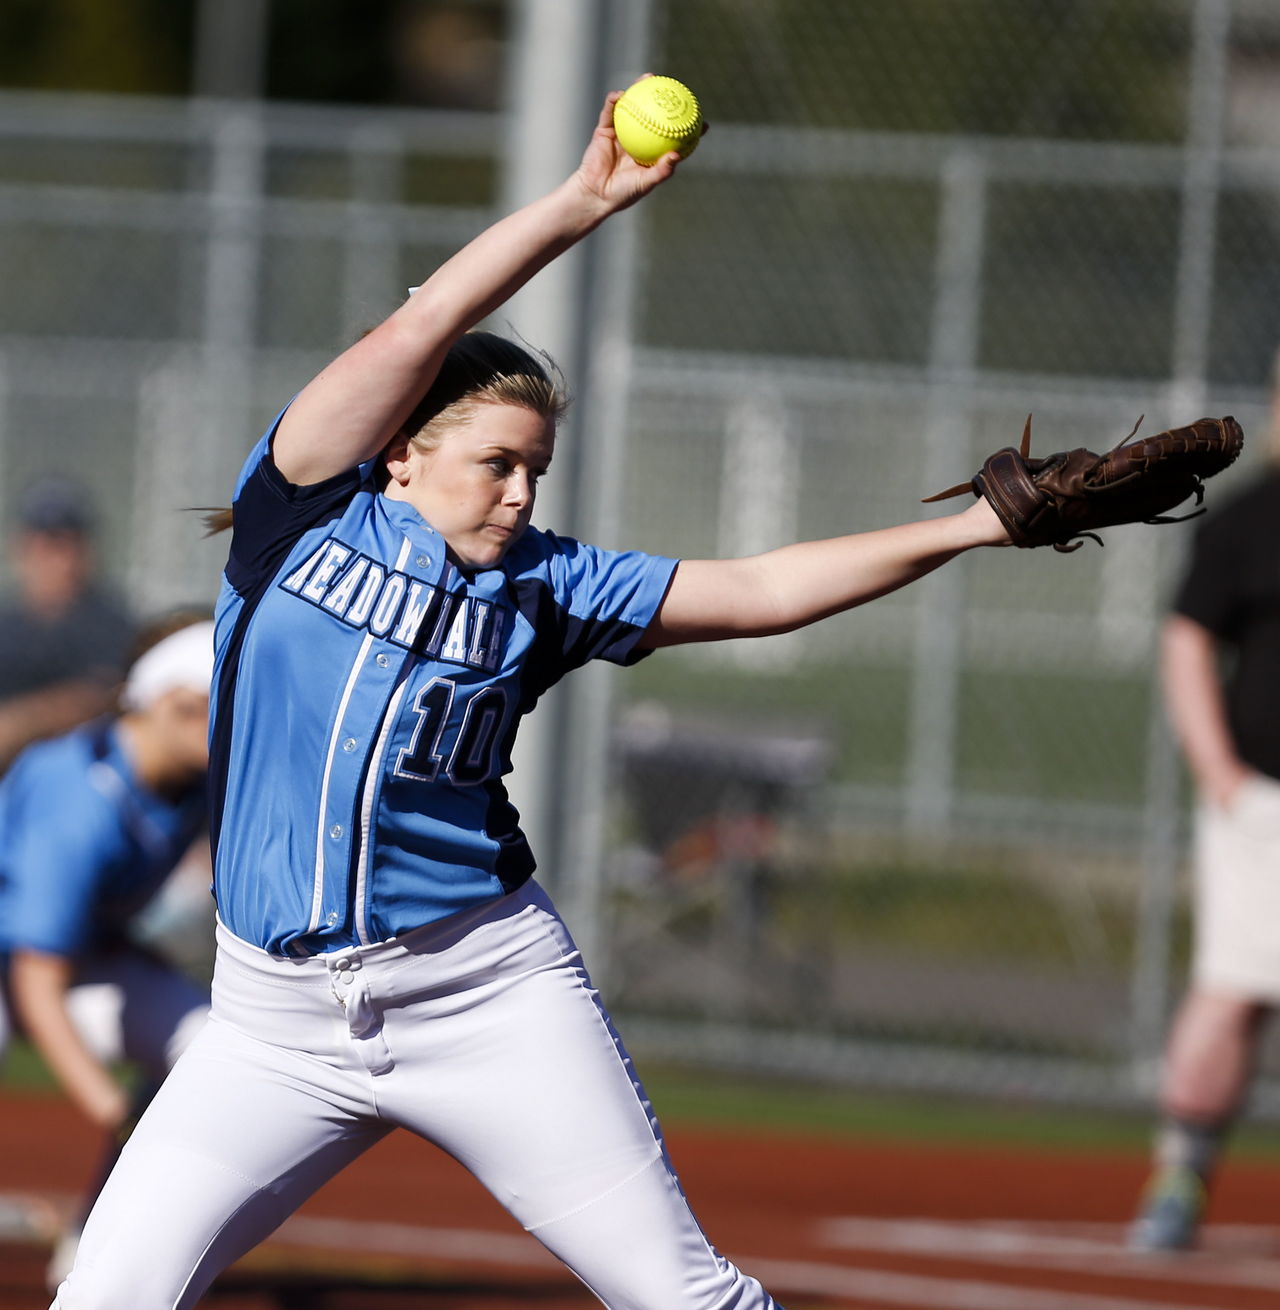 Meadowdale’s Lauren Dent delivers a pitch on her way to throwing a no-hitter against Lynnwood on Friday at Lynnwood High School.